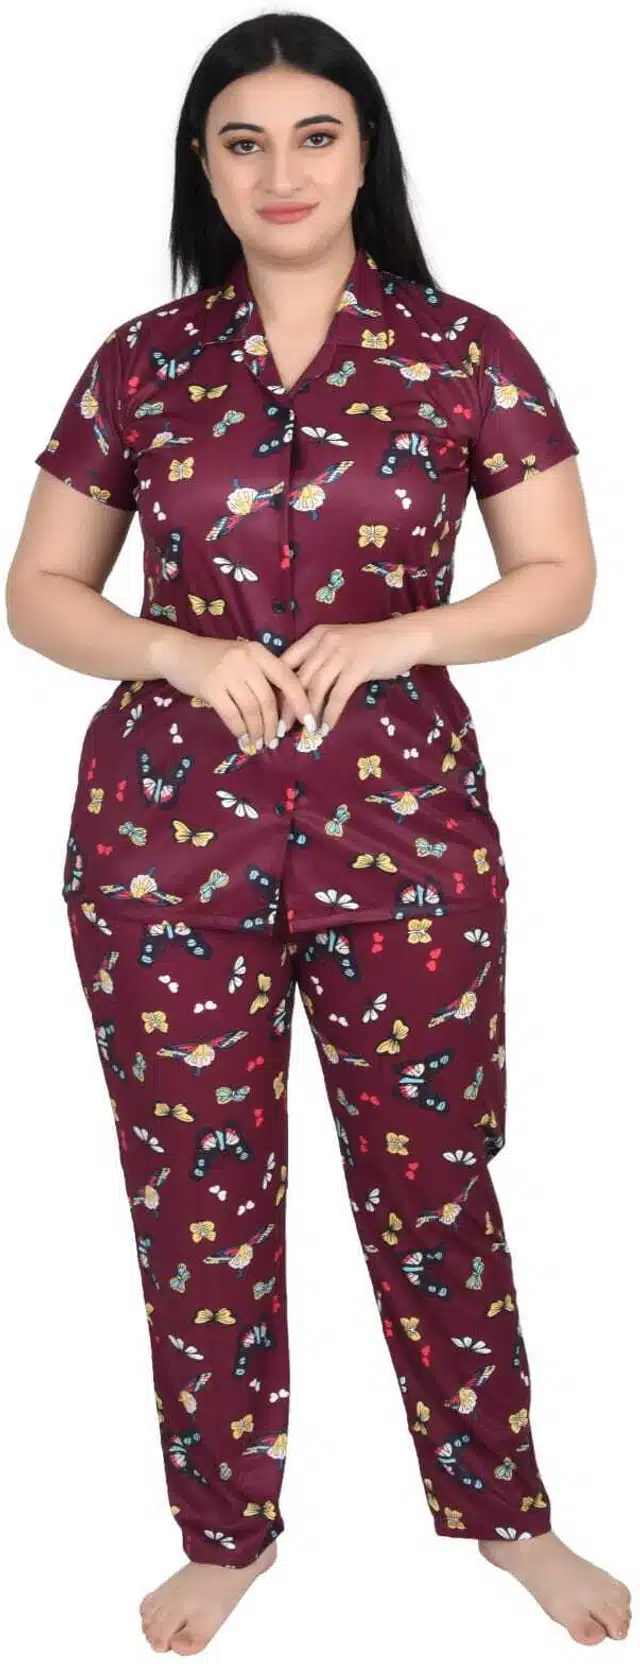 Satin Printed Night Suit for Women (Maroon, Free)